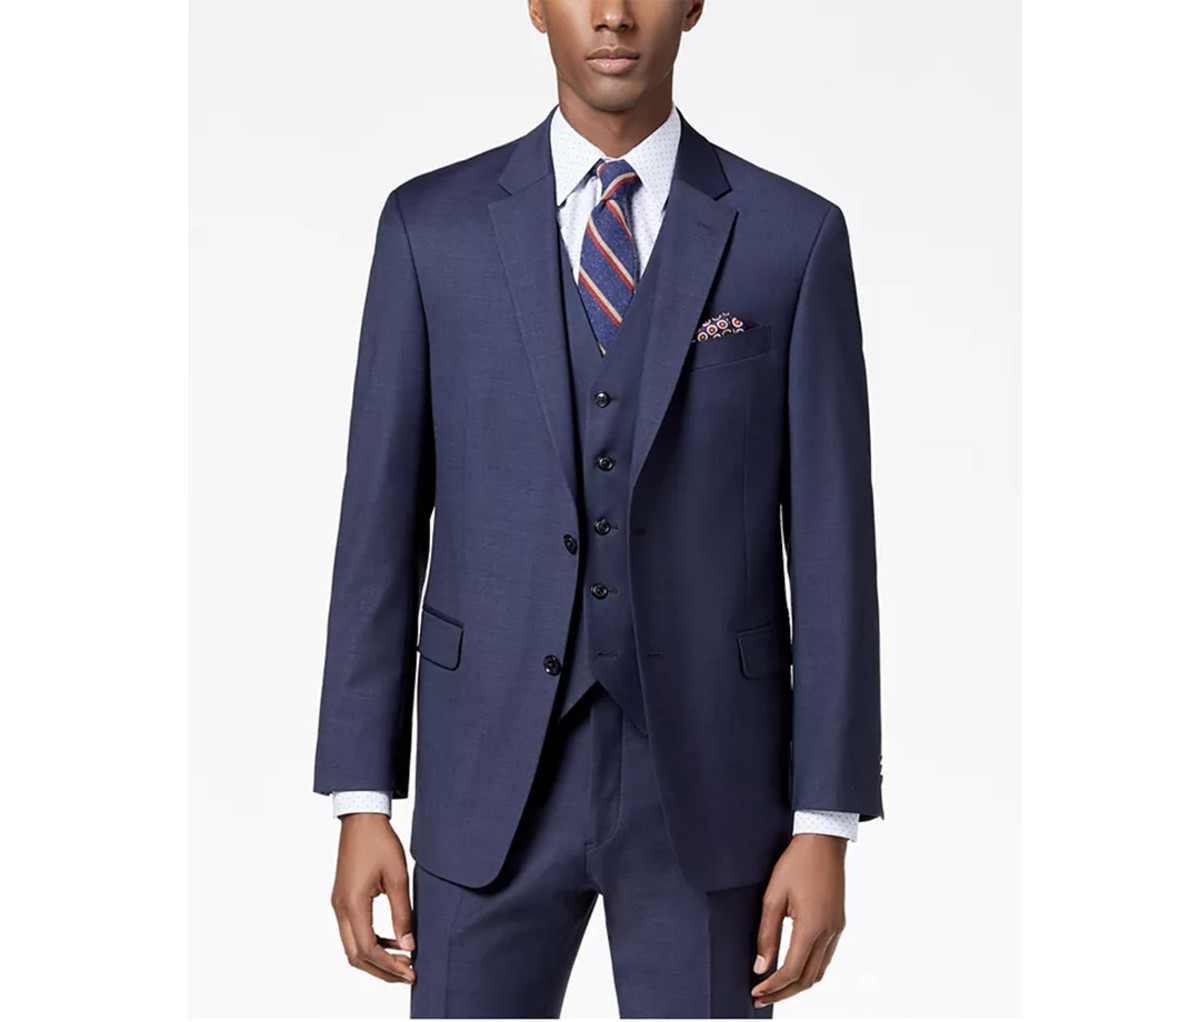 Seletøj græs otte This Tommy Hilfiger Suit Has All The Comfort and Style You Could Ask For -  Men's Journal